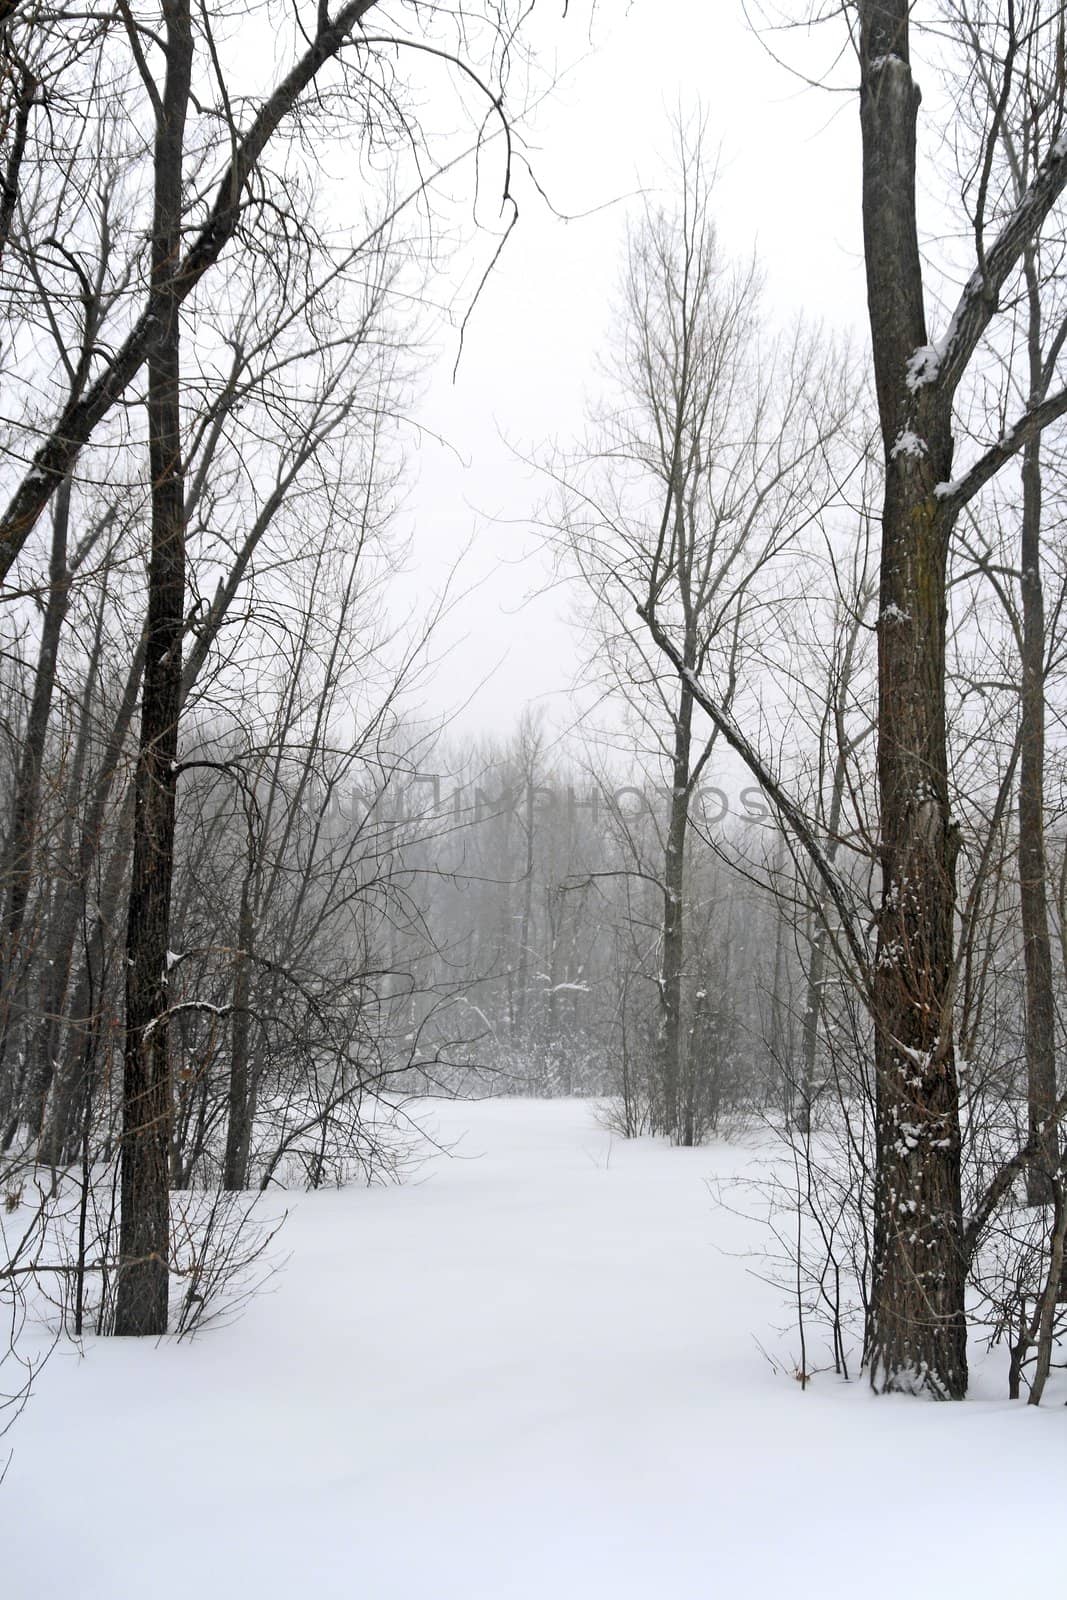 Winter forest in snow during a blizzard.